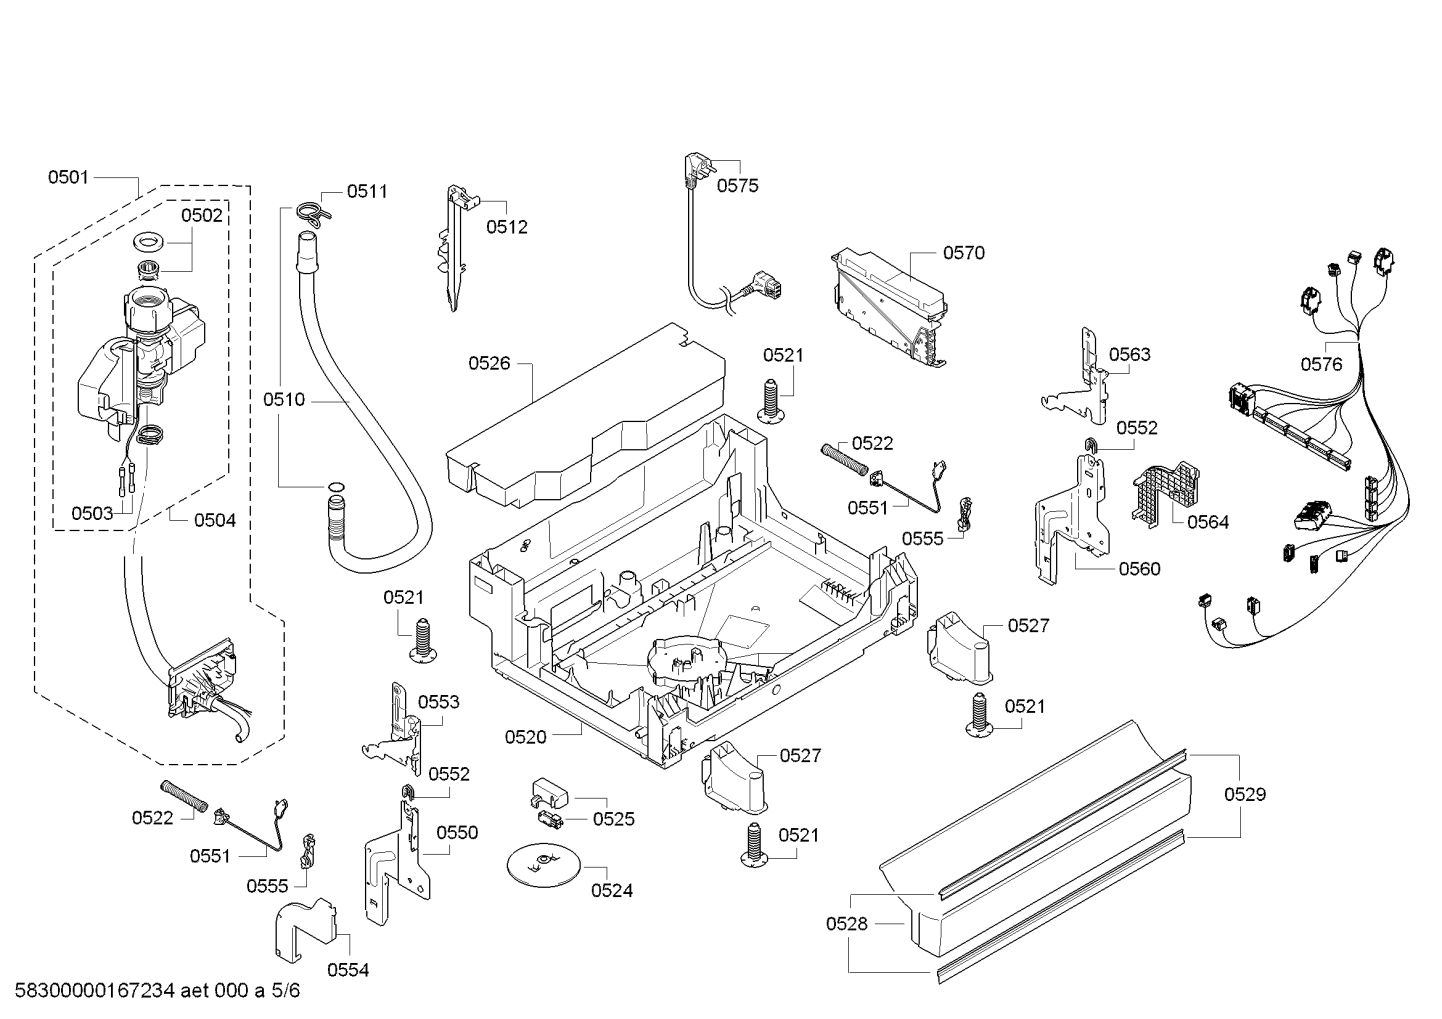 drawing_link_6_device_1623154